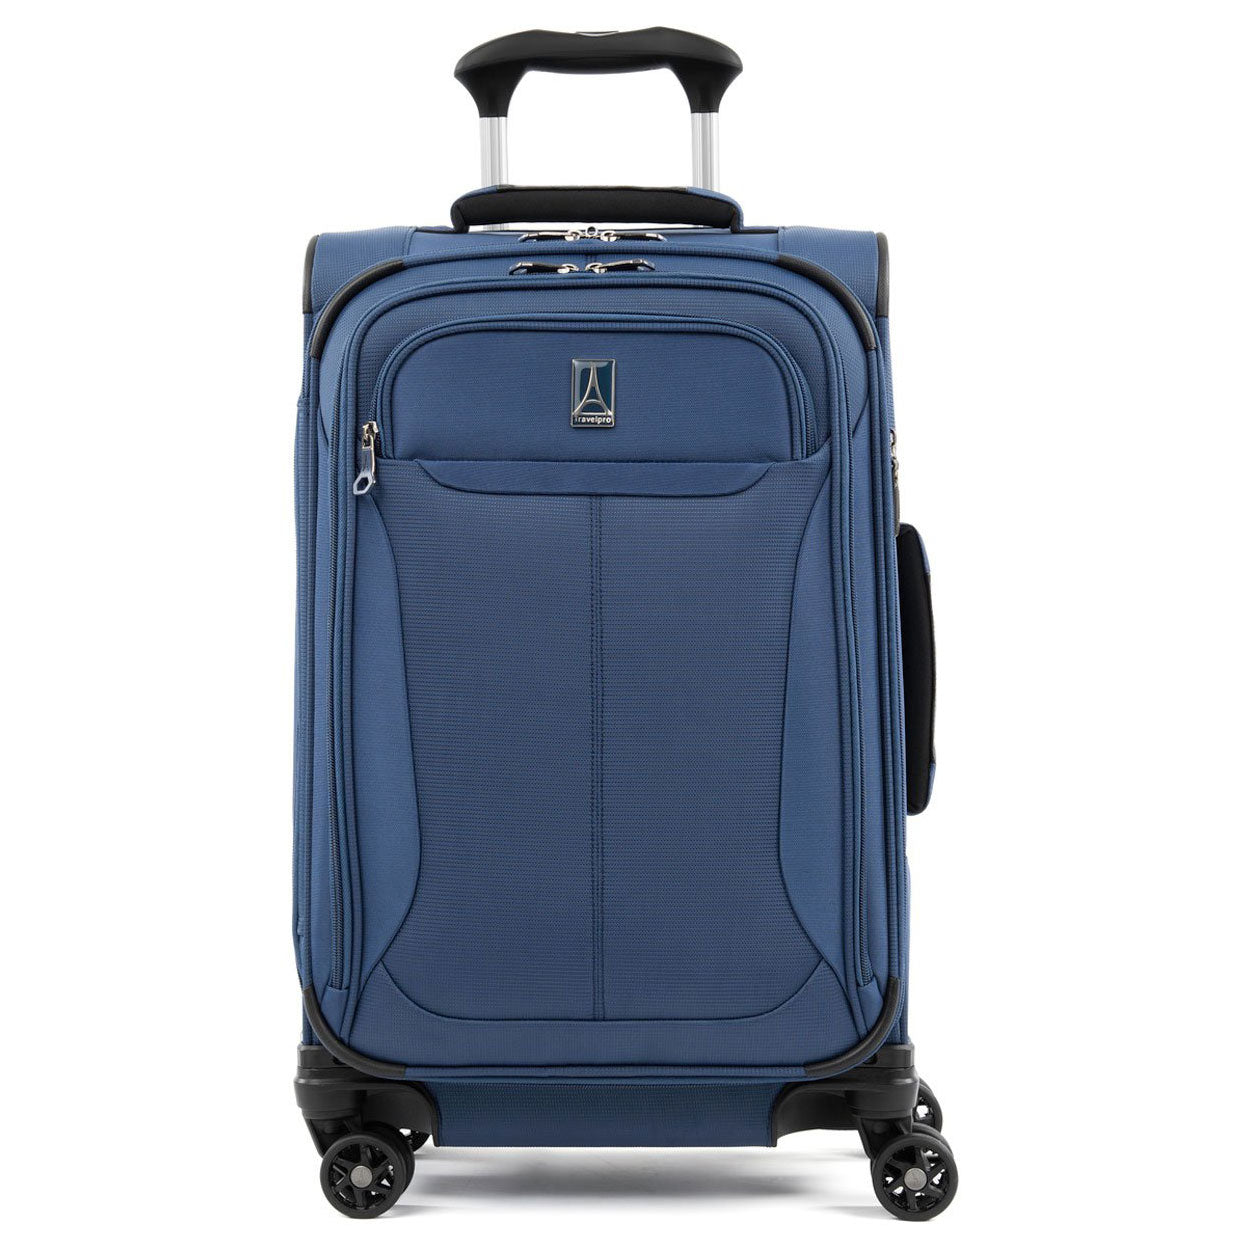 Travelpro TourLite 21" Expandable Spinner Carry-on Blue